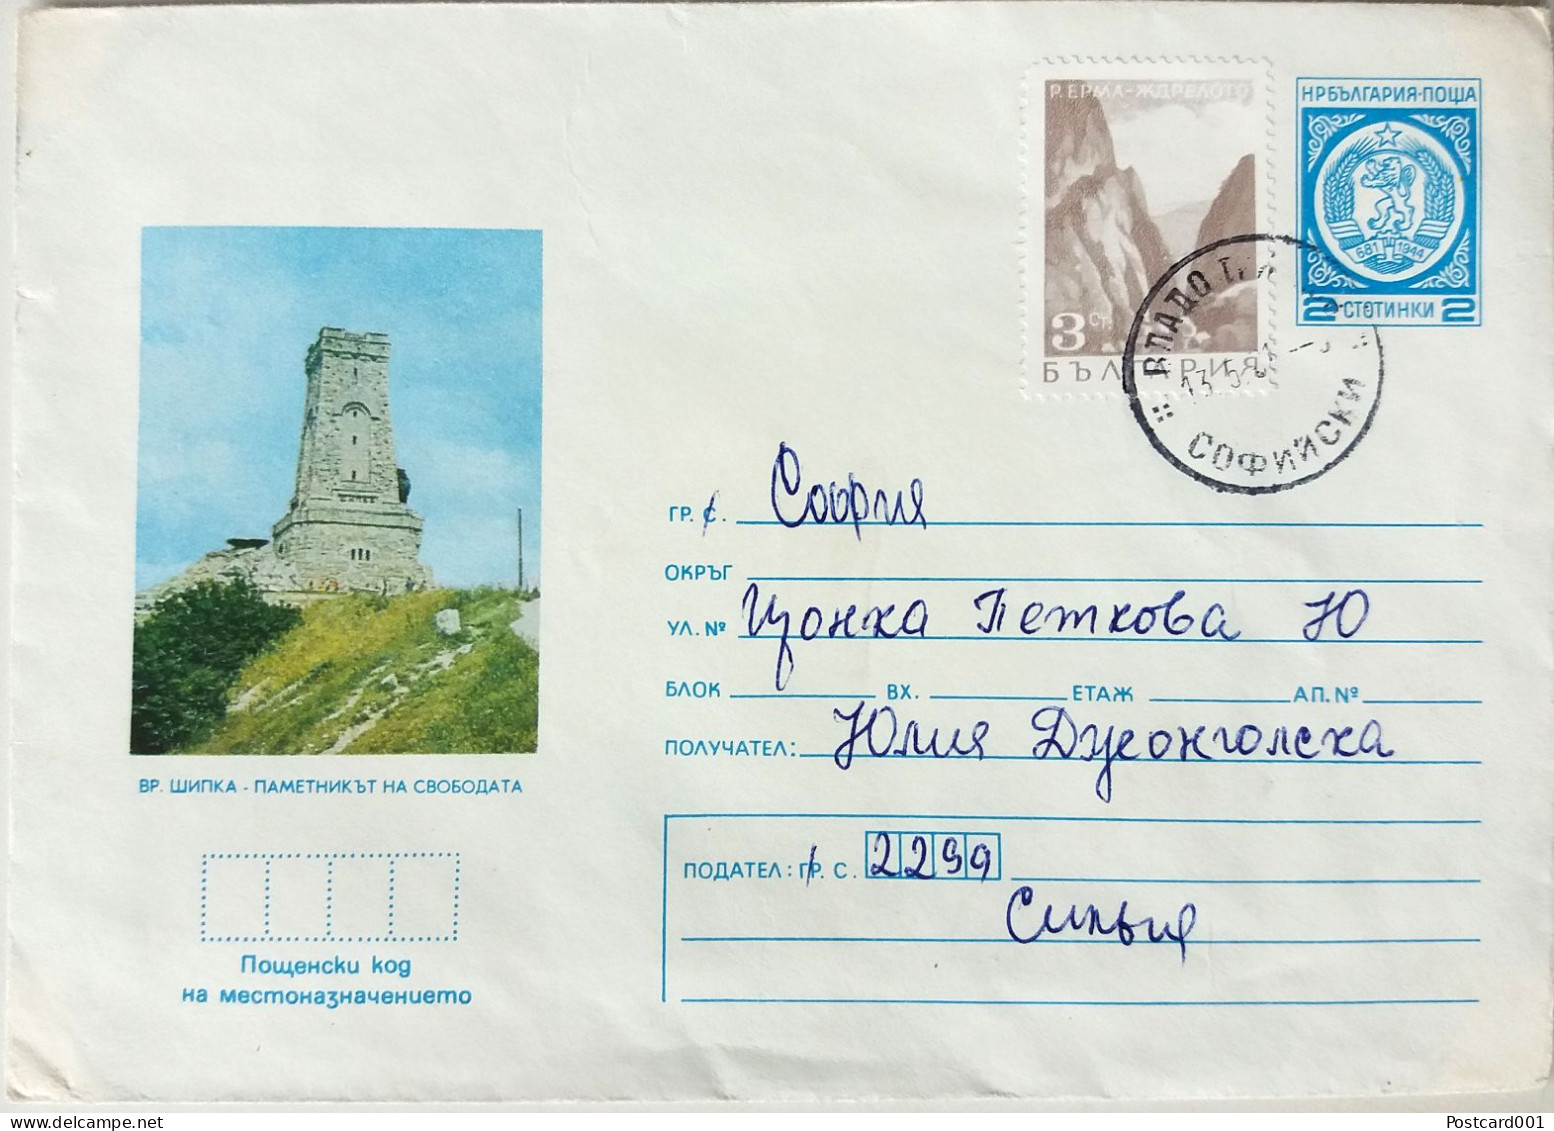 #84 Traveled Envelope 'Monument Of Freedom Shipka' Bulgaria 1980 - Stapms Local Mail - Covers & Documents